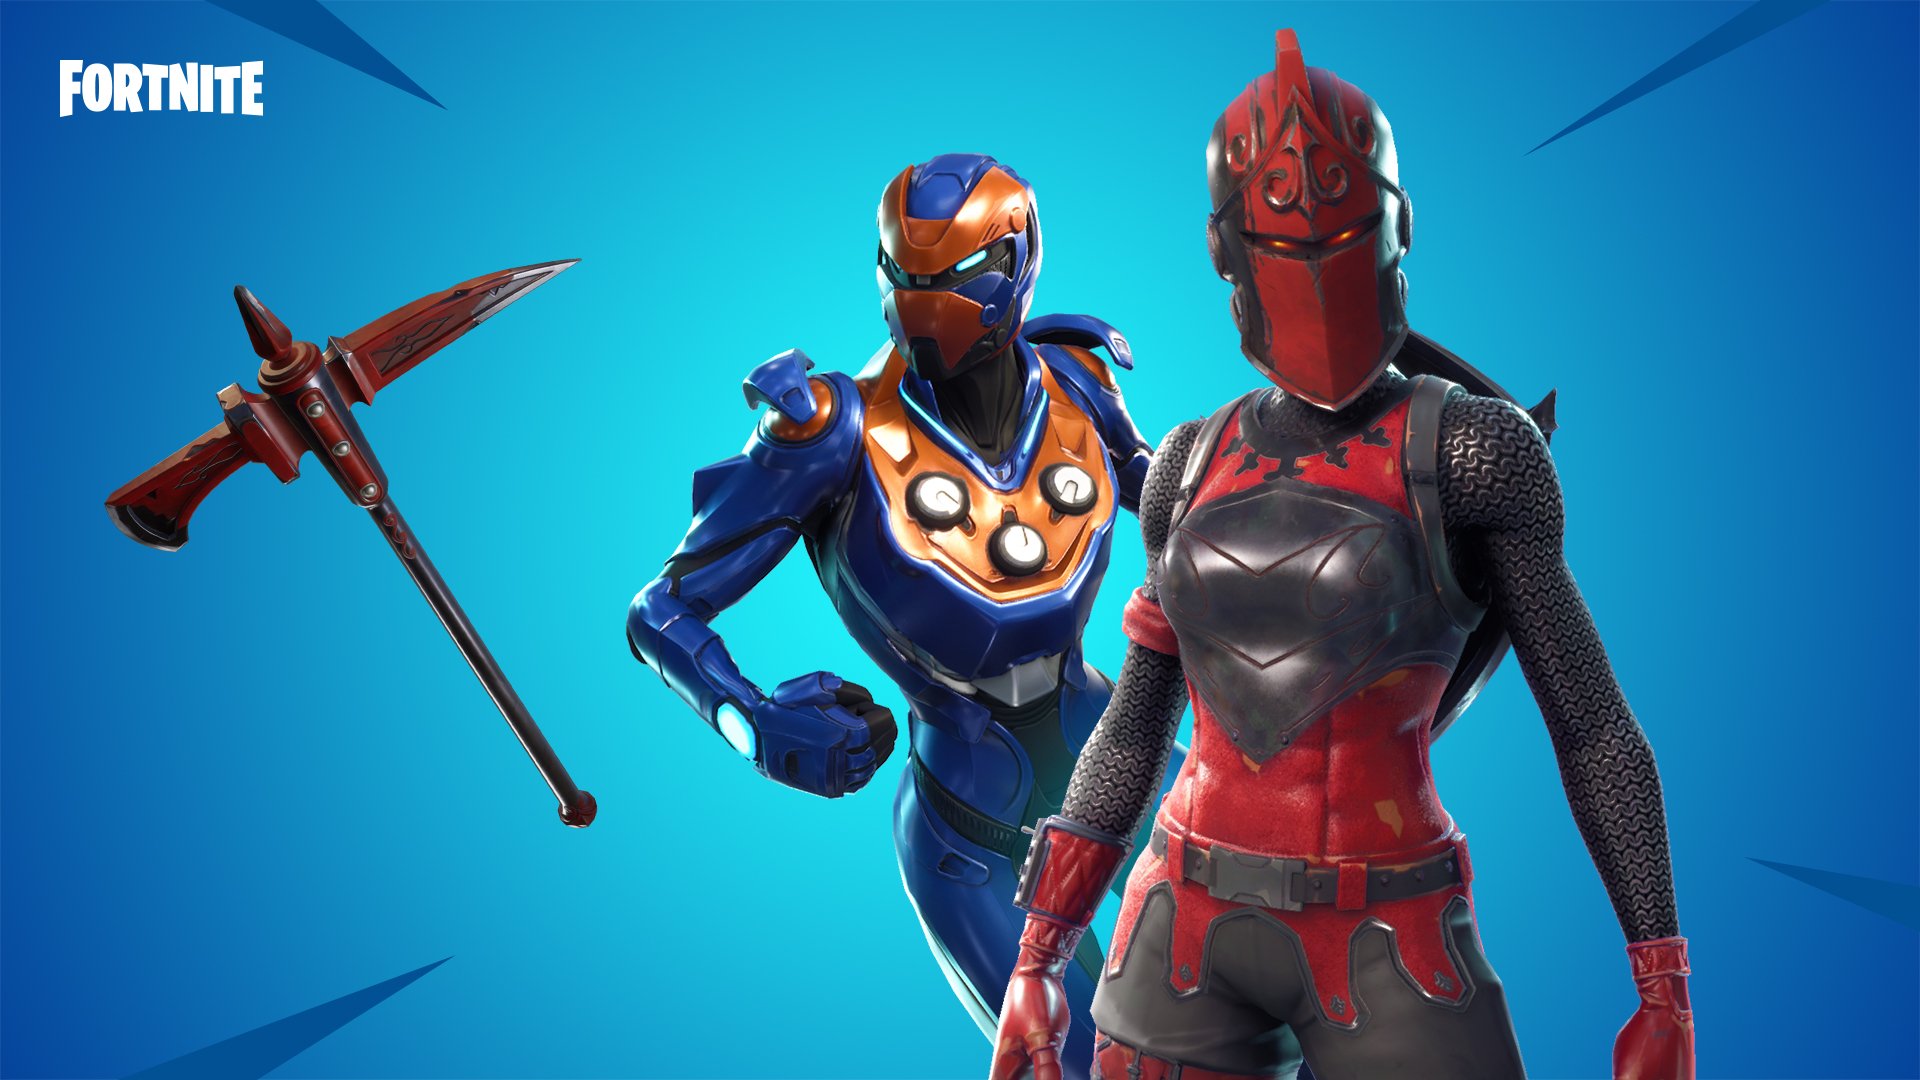 Fortnite on fight for honor with the red knight and new criterion outfit available in the item shop now httpstcoilyavxliw